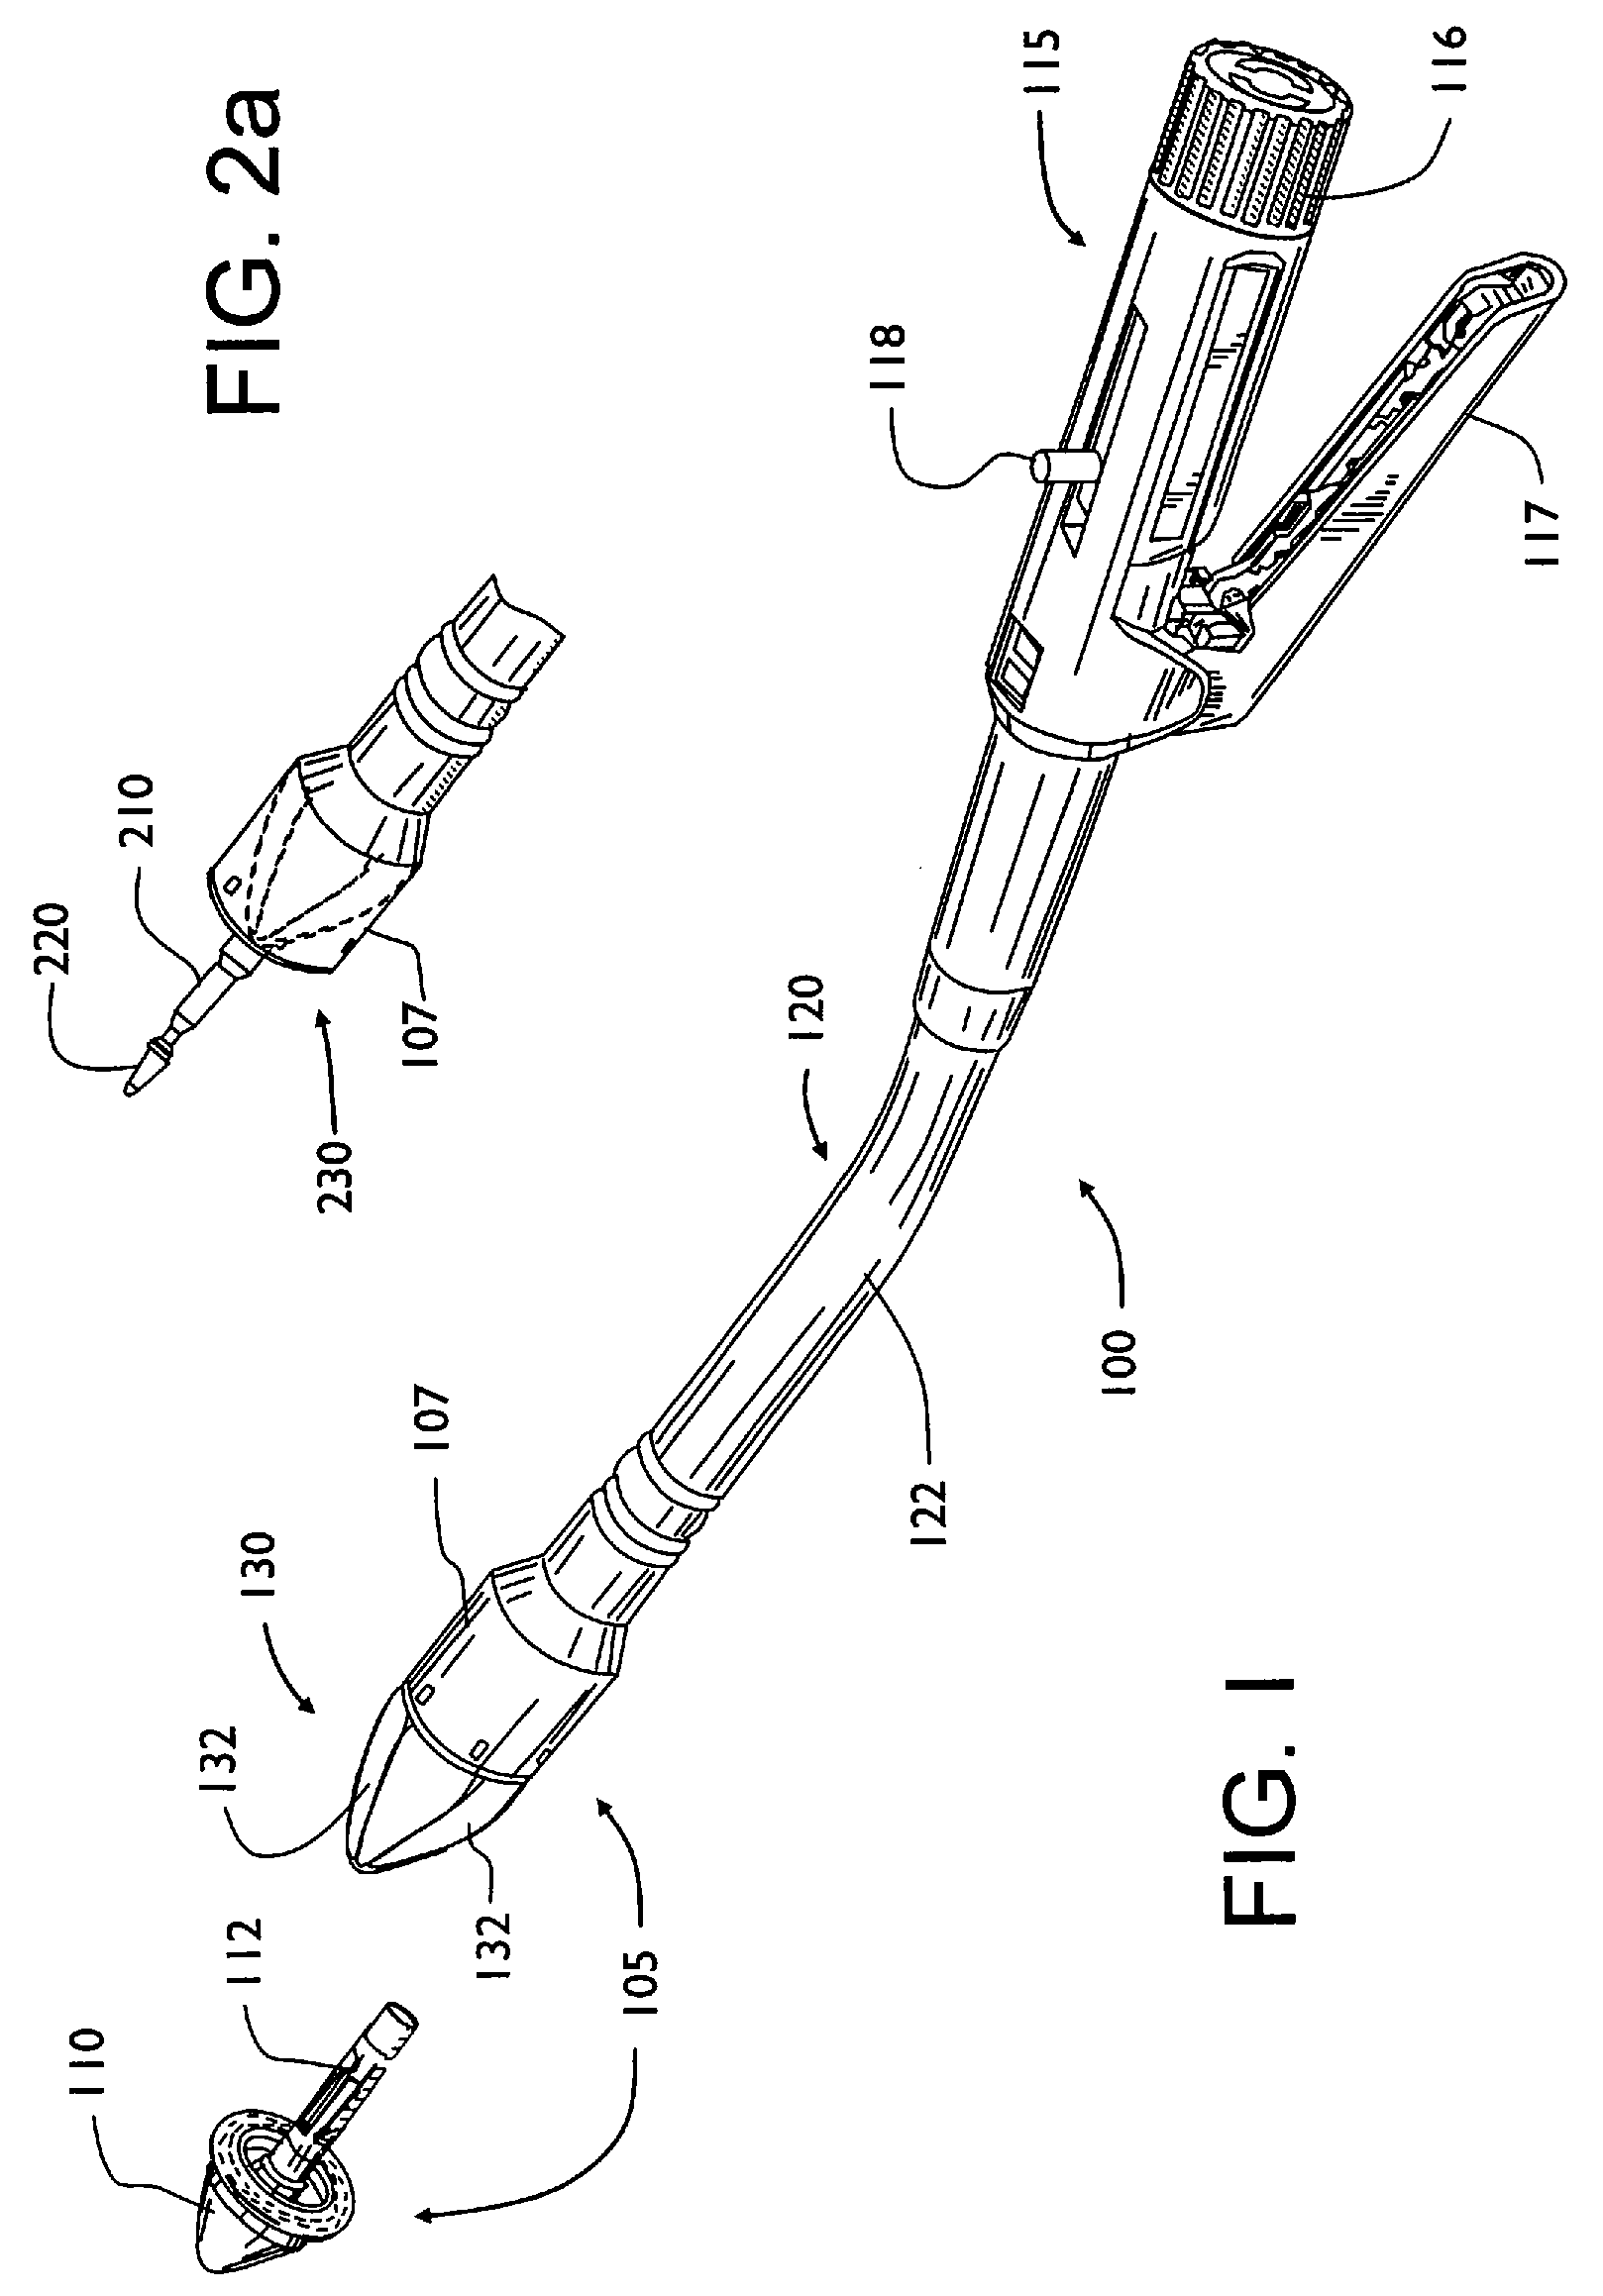 Shield for surgical stapler and method of use